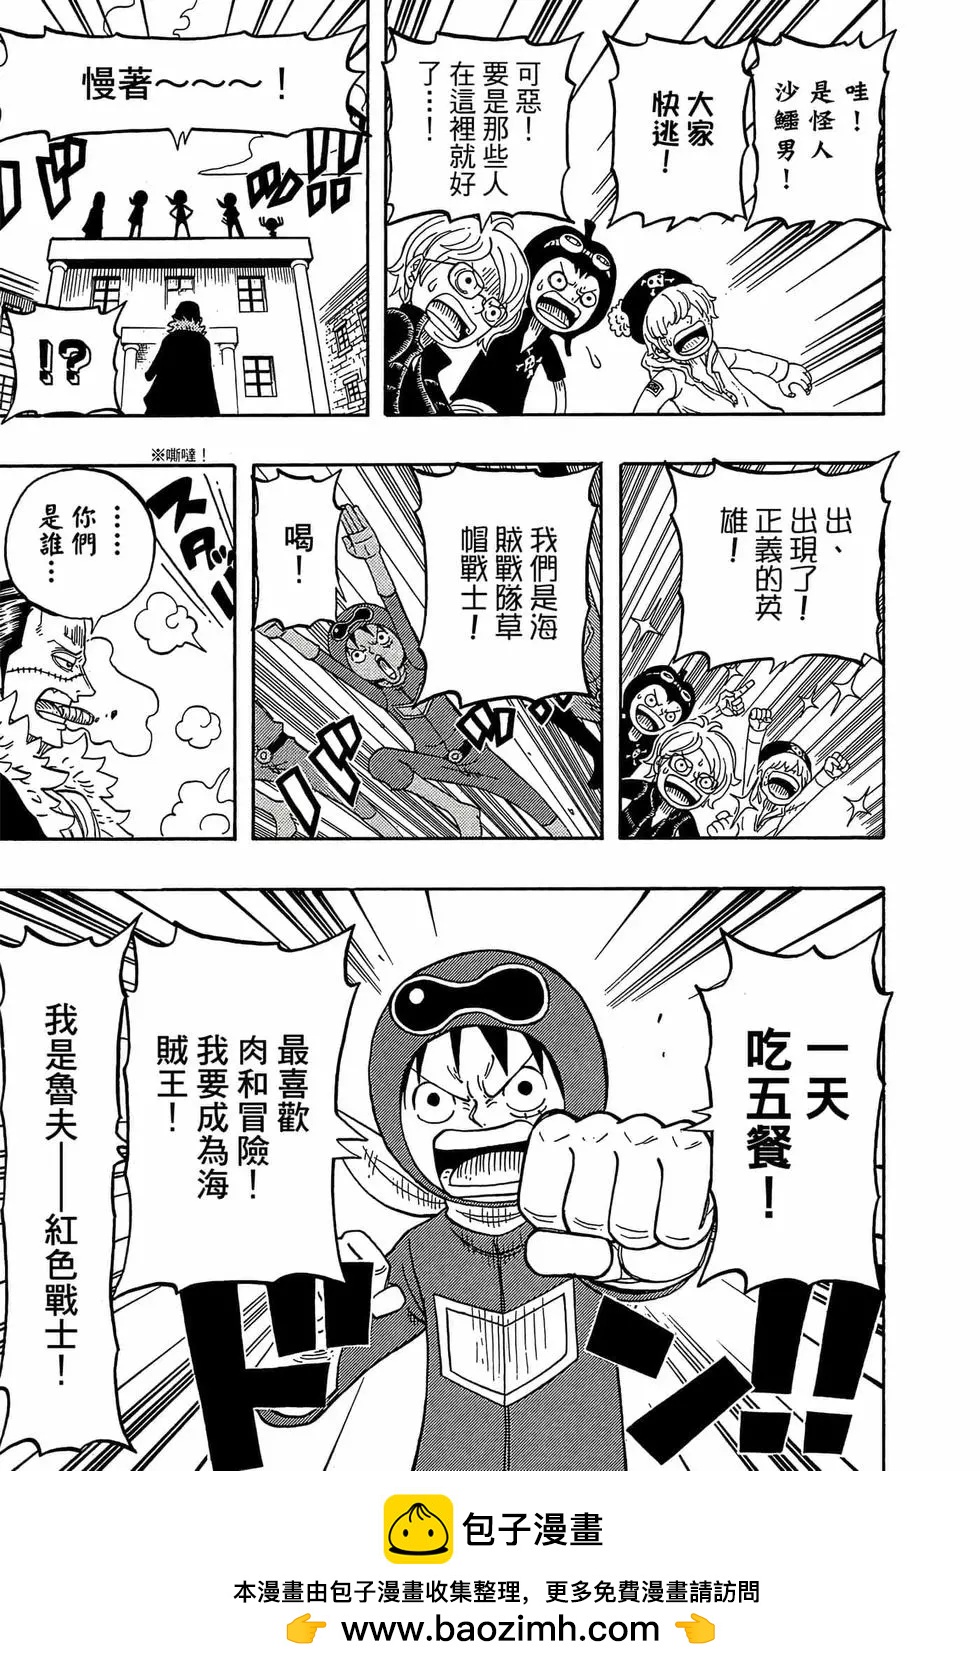 One piece party - 第01卷(3/4) - 6